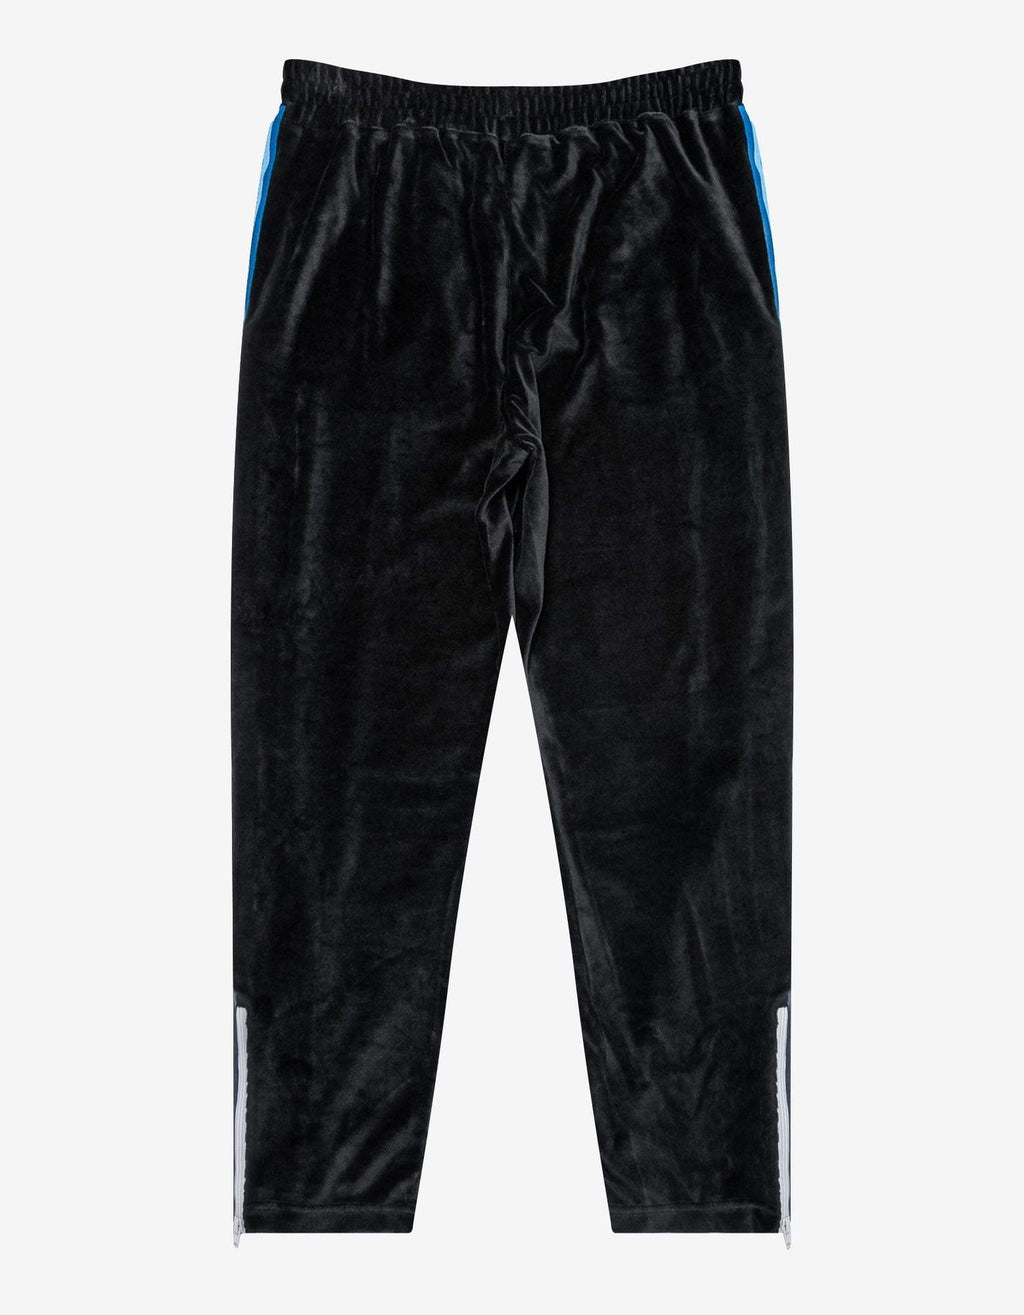 Palm Angels Black Chenille Track Pants with Rainbow Stripes